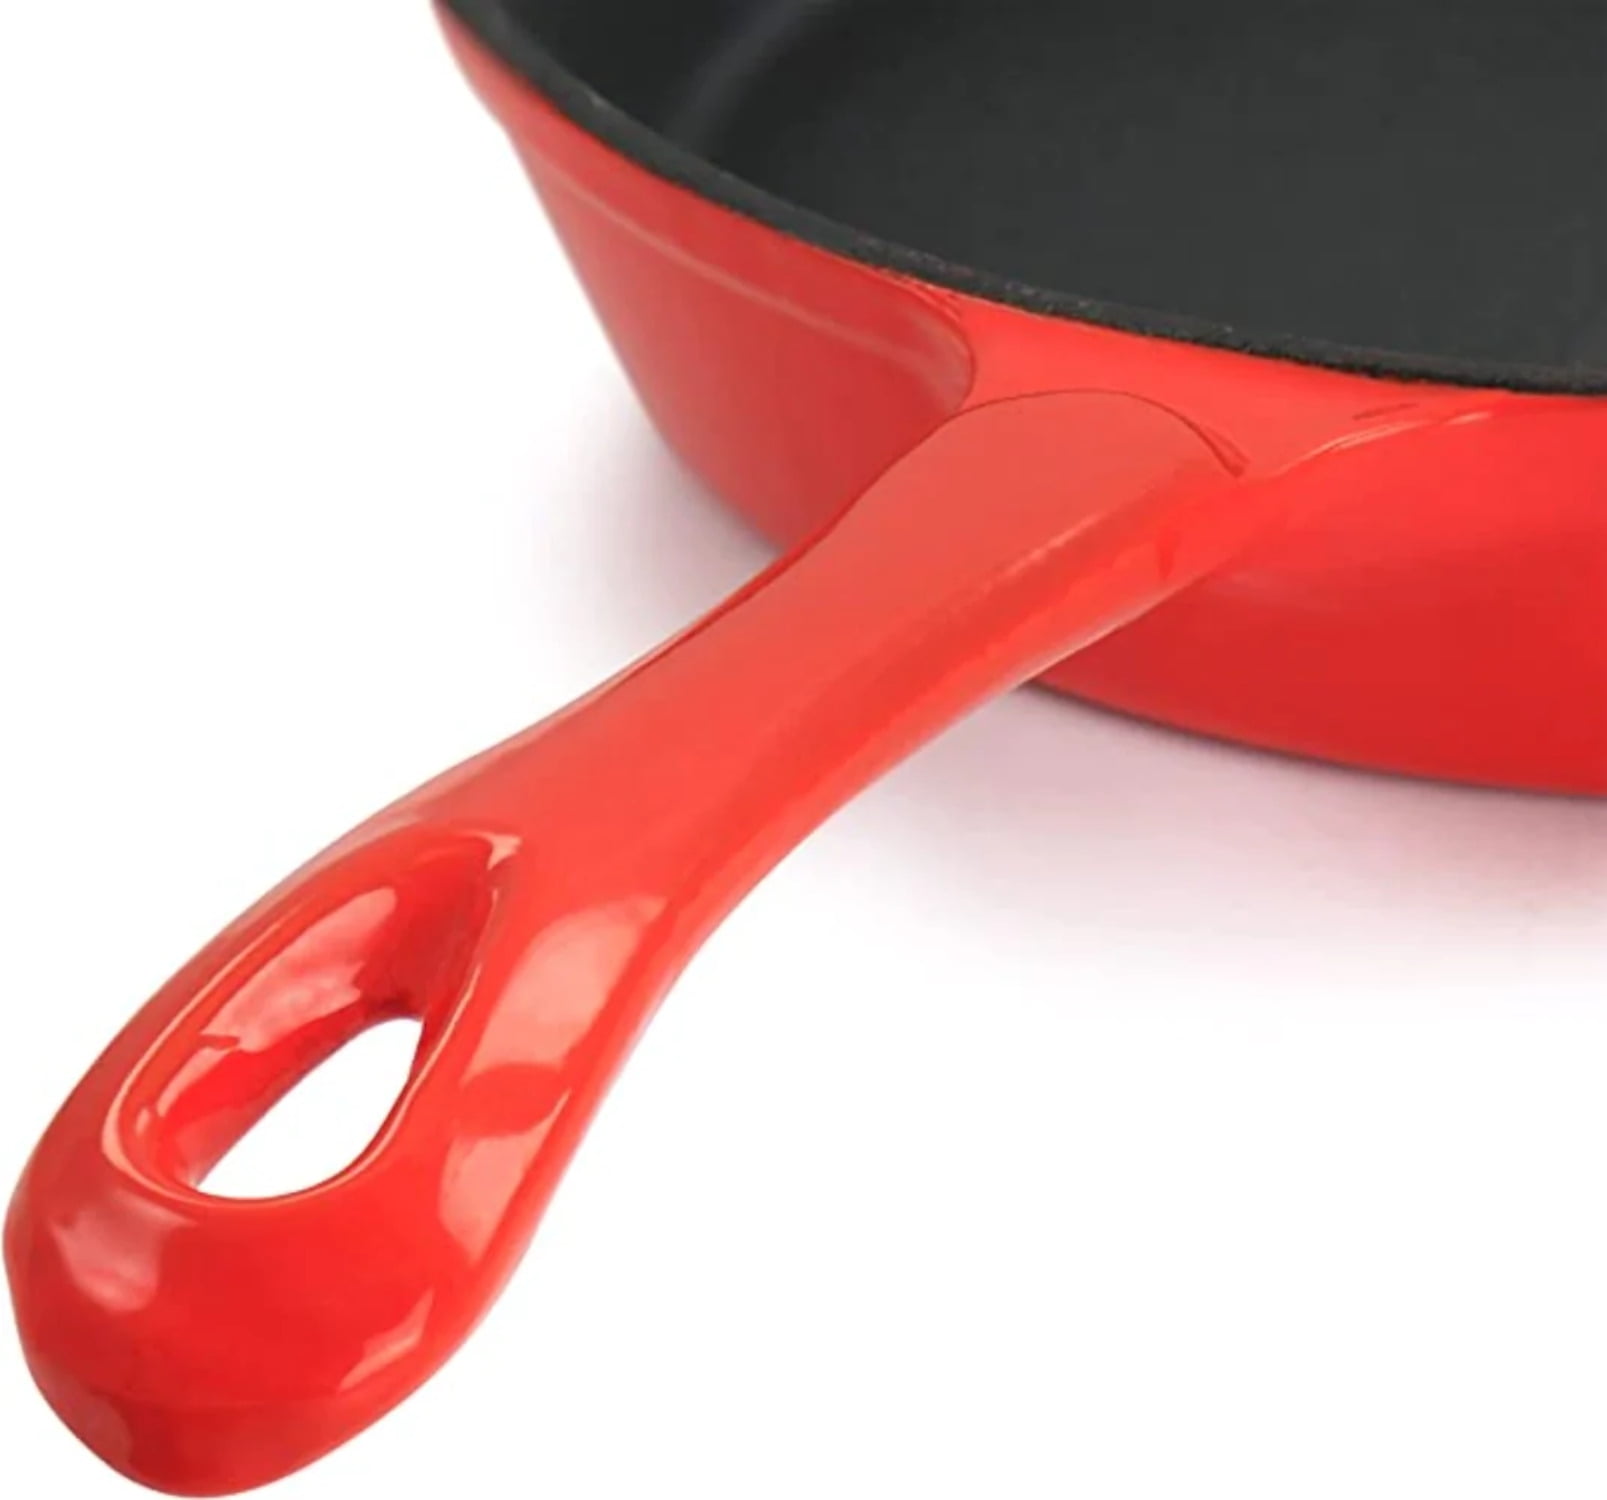 Enameled Cast Iron 8 Fry Pan - Red – Eco + Chef Kitchen